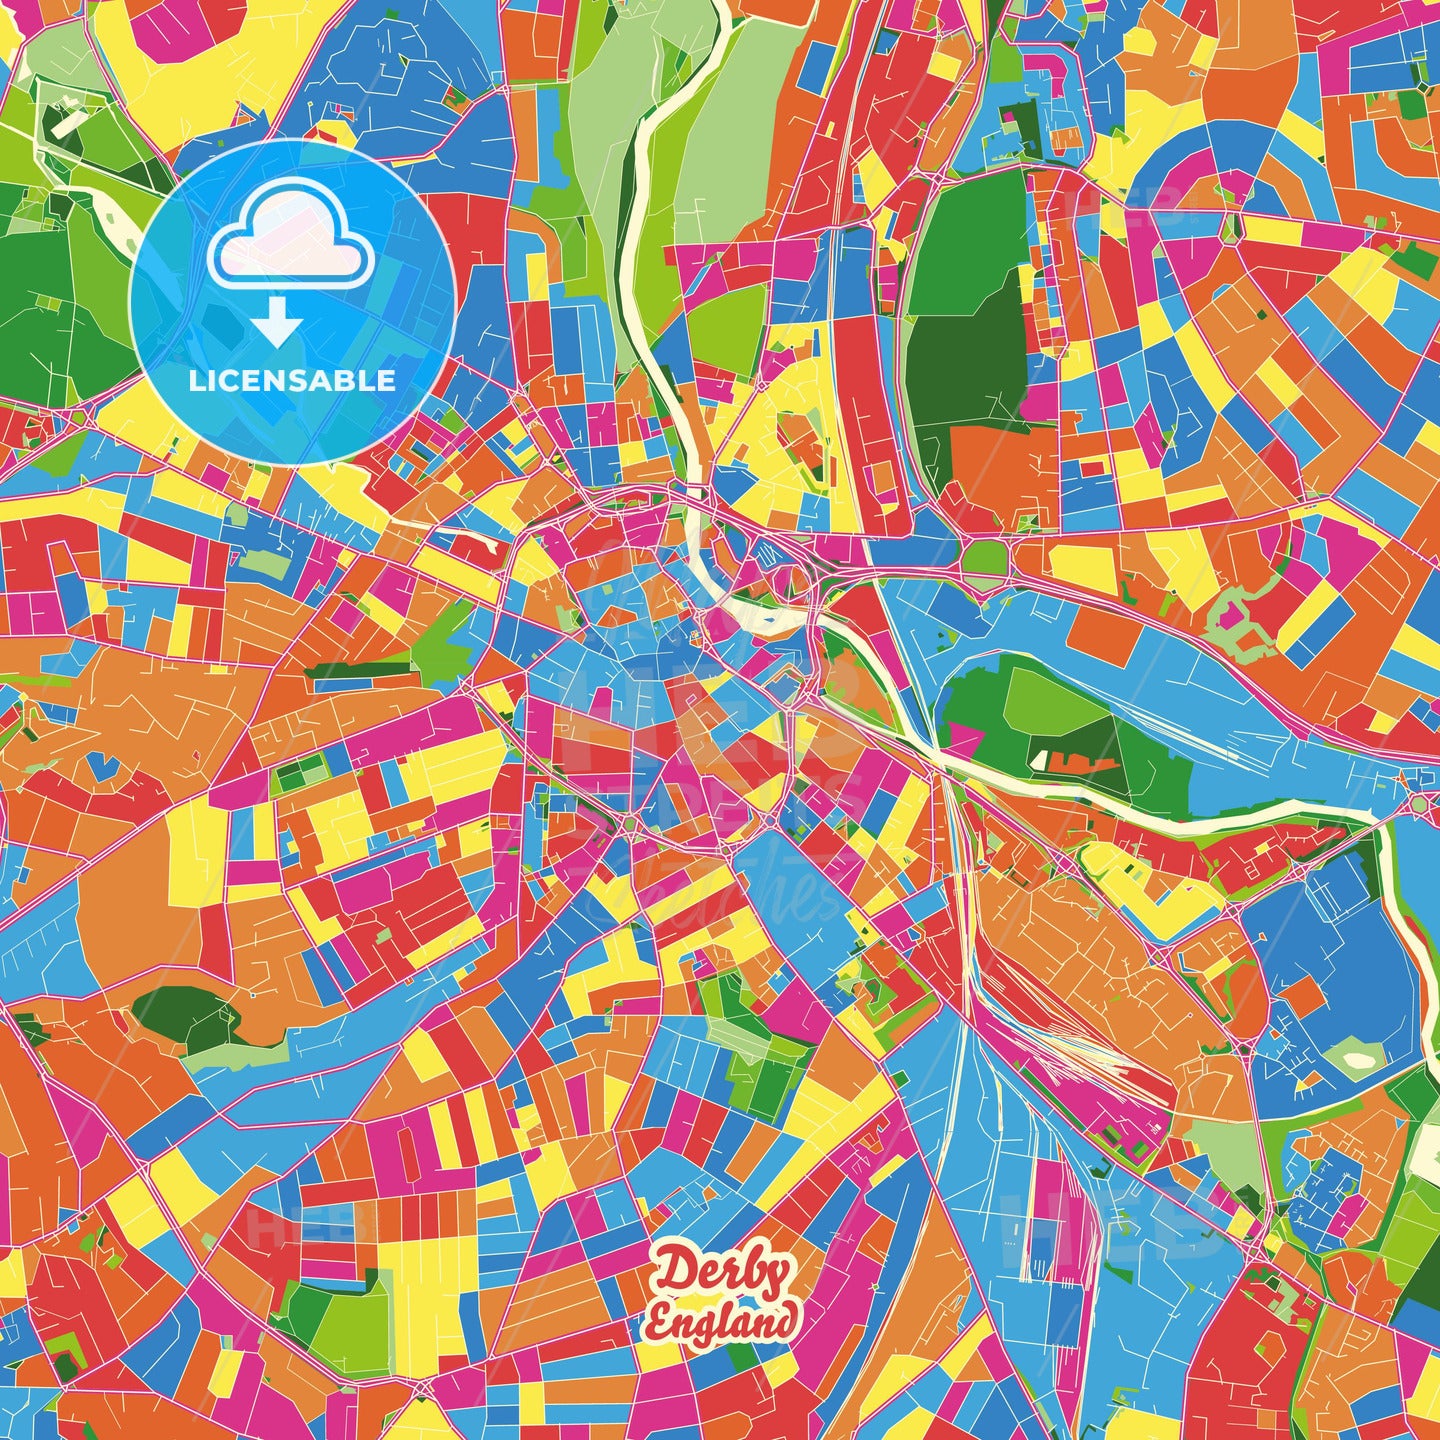 Derby, England Crazy Colorful Street Map Poster Template - HEBSTREITS Sketches